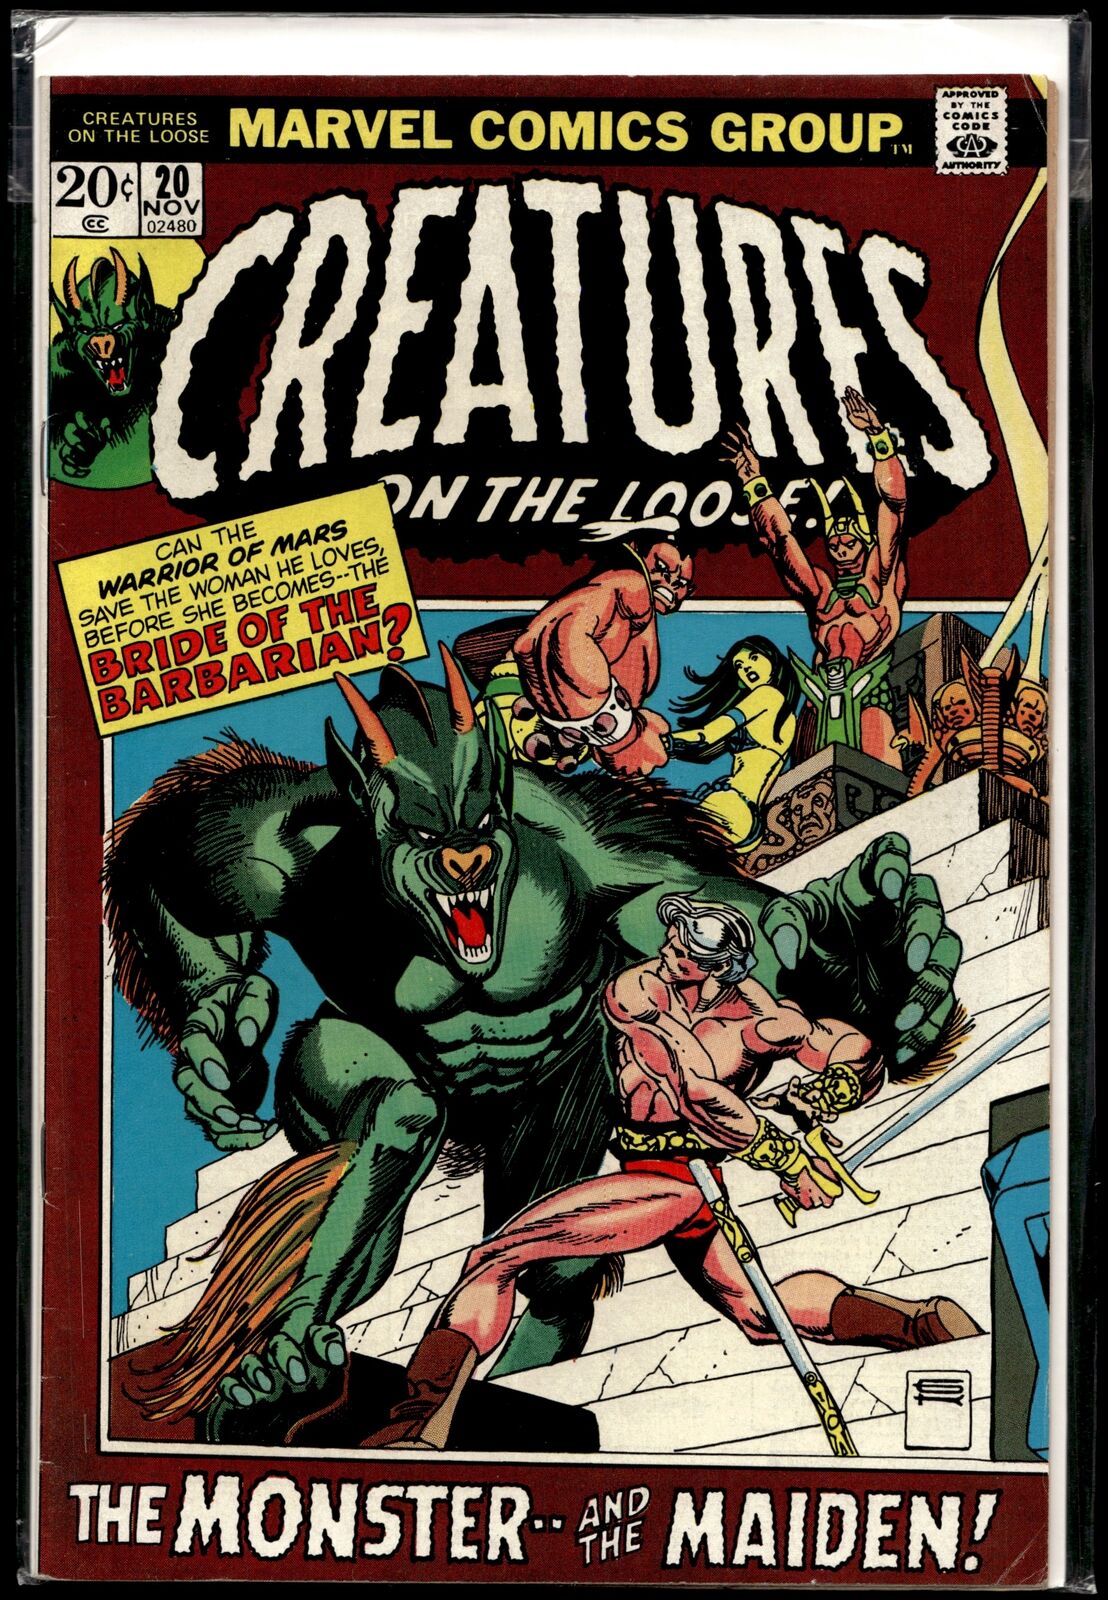 1972 Creatures on the Loose #20 Marvel Comic